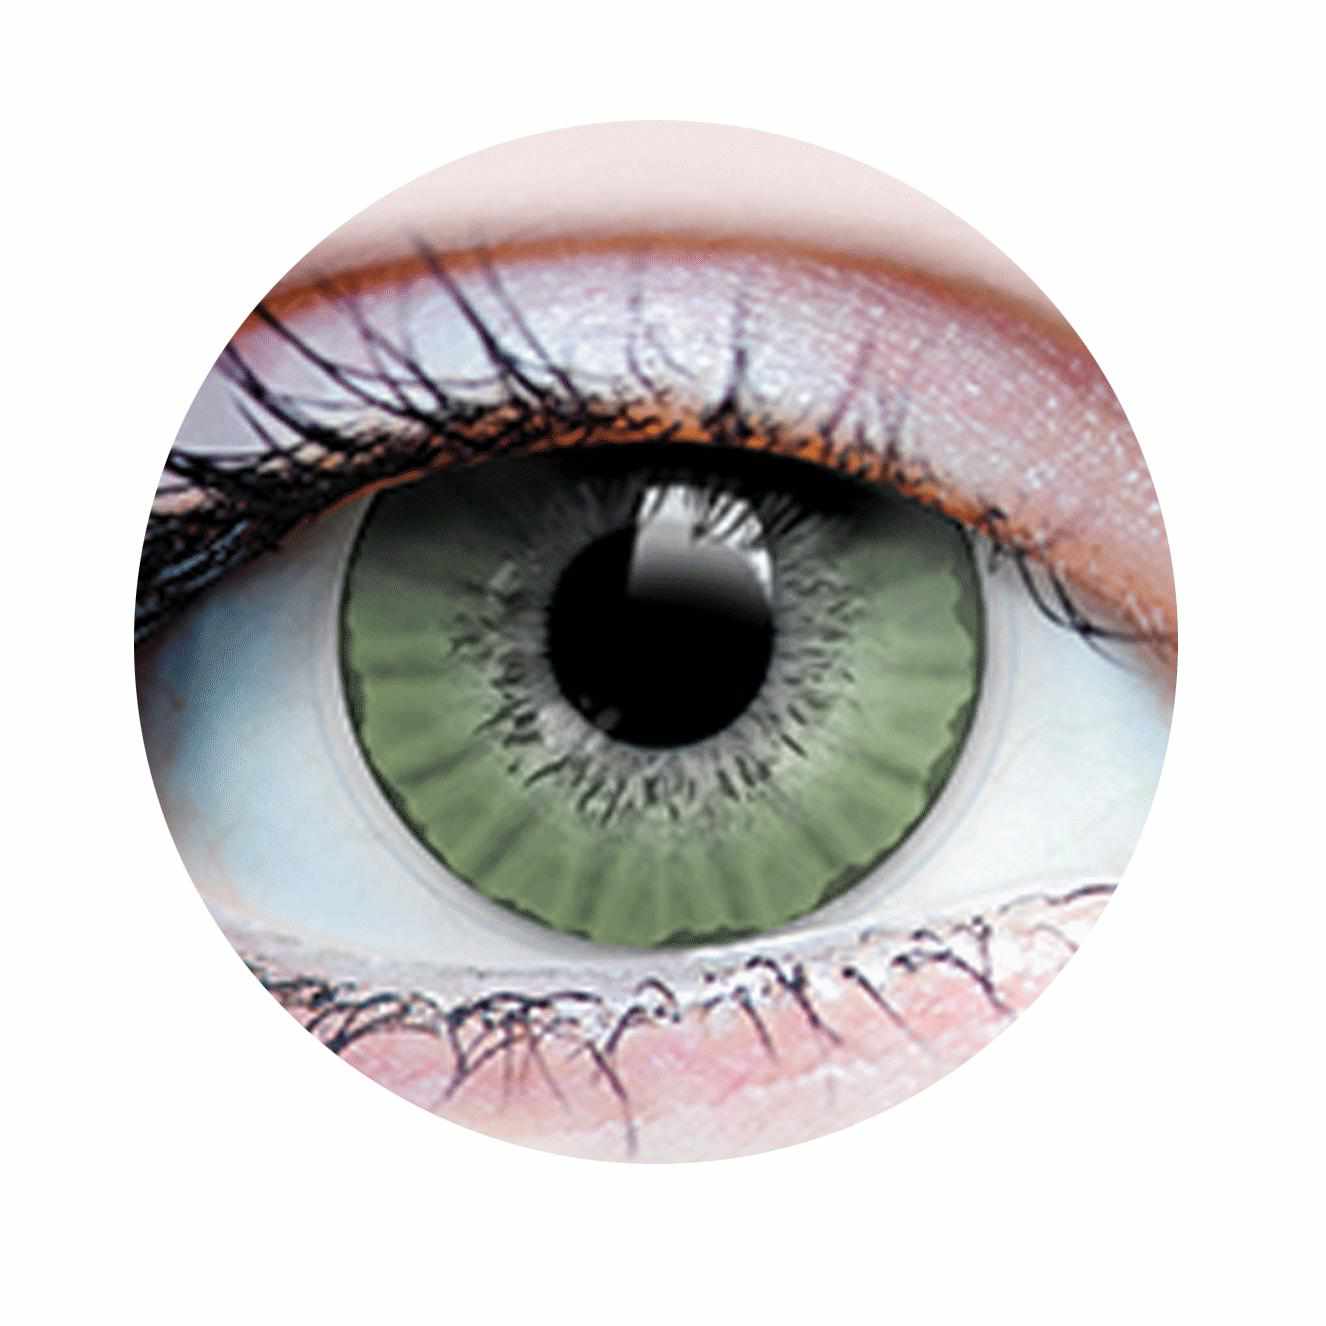 Green colored contact lenses, coloured contact lenses, color contacts, circle lens.